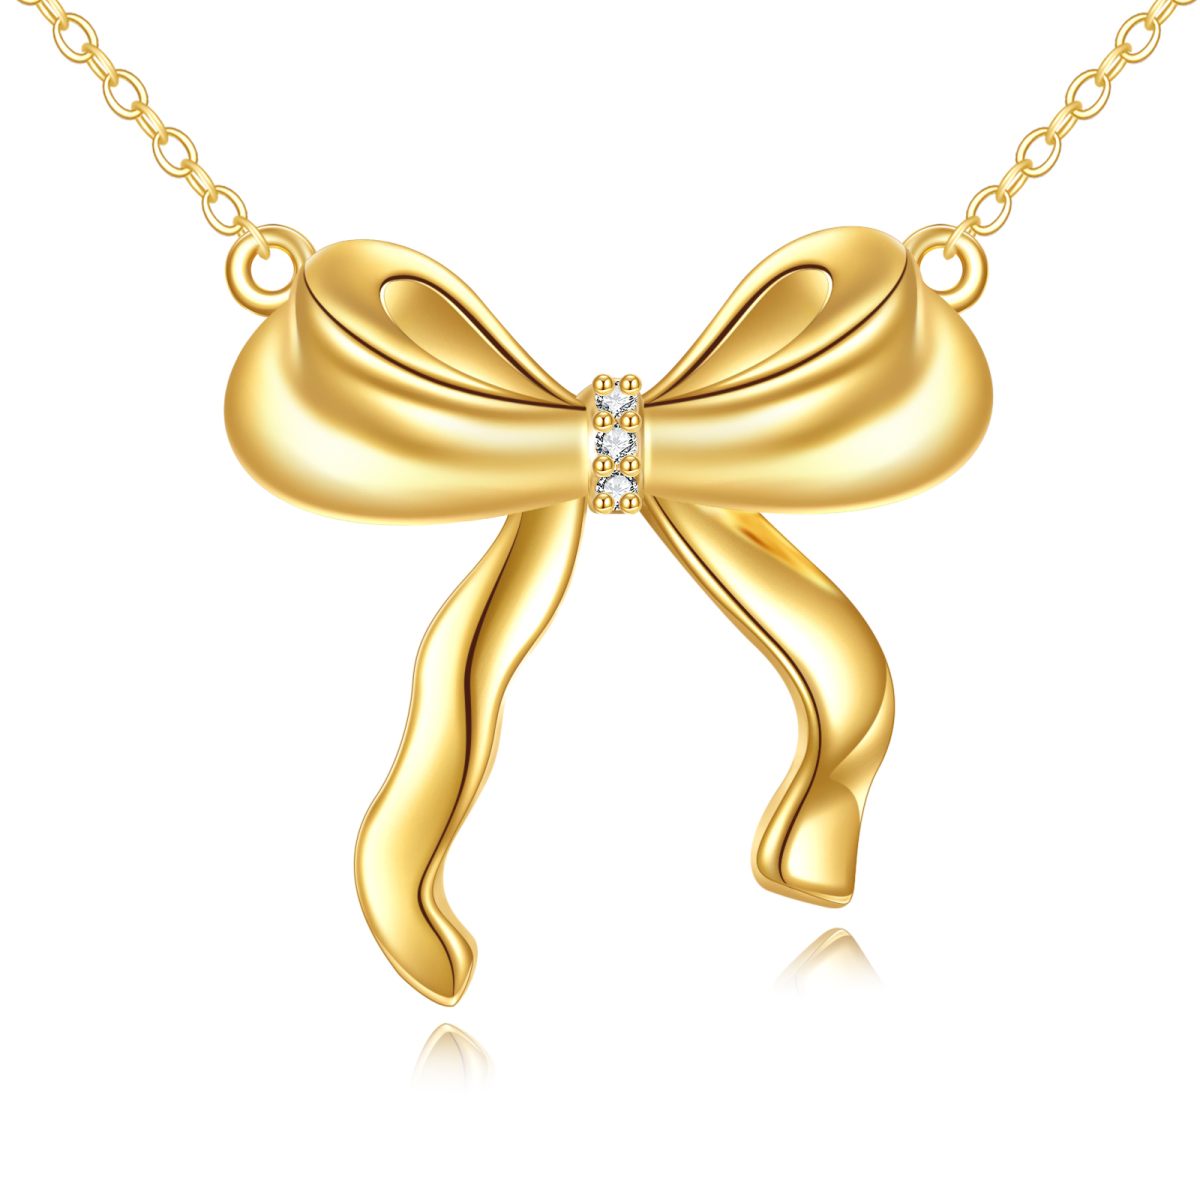 10K Gold Circular Shaped Cubic Zirconia Bow Pendant Necklace-1